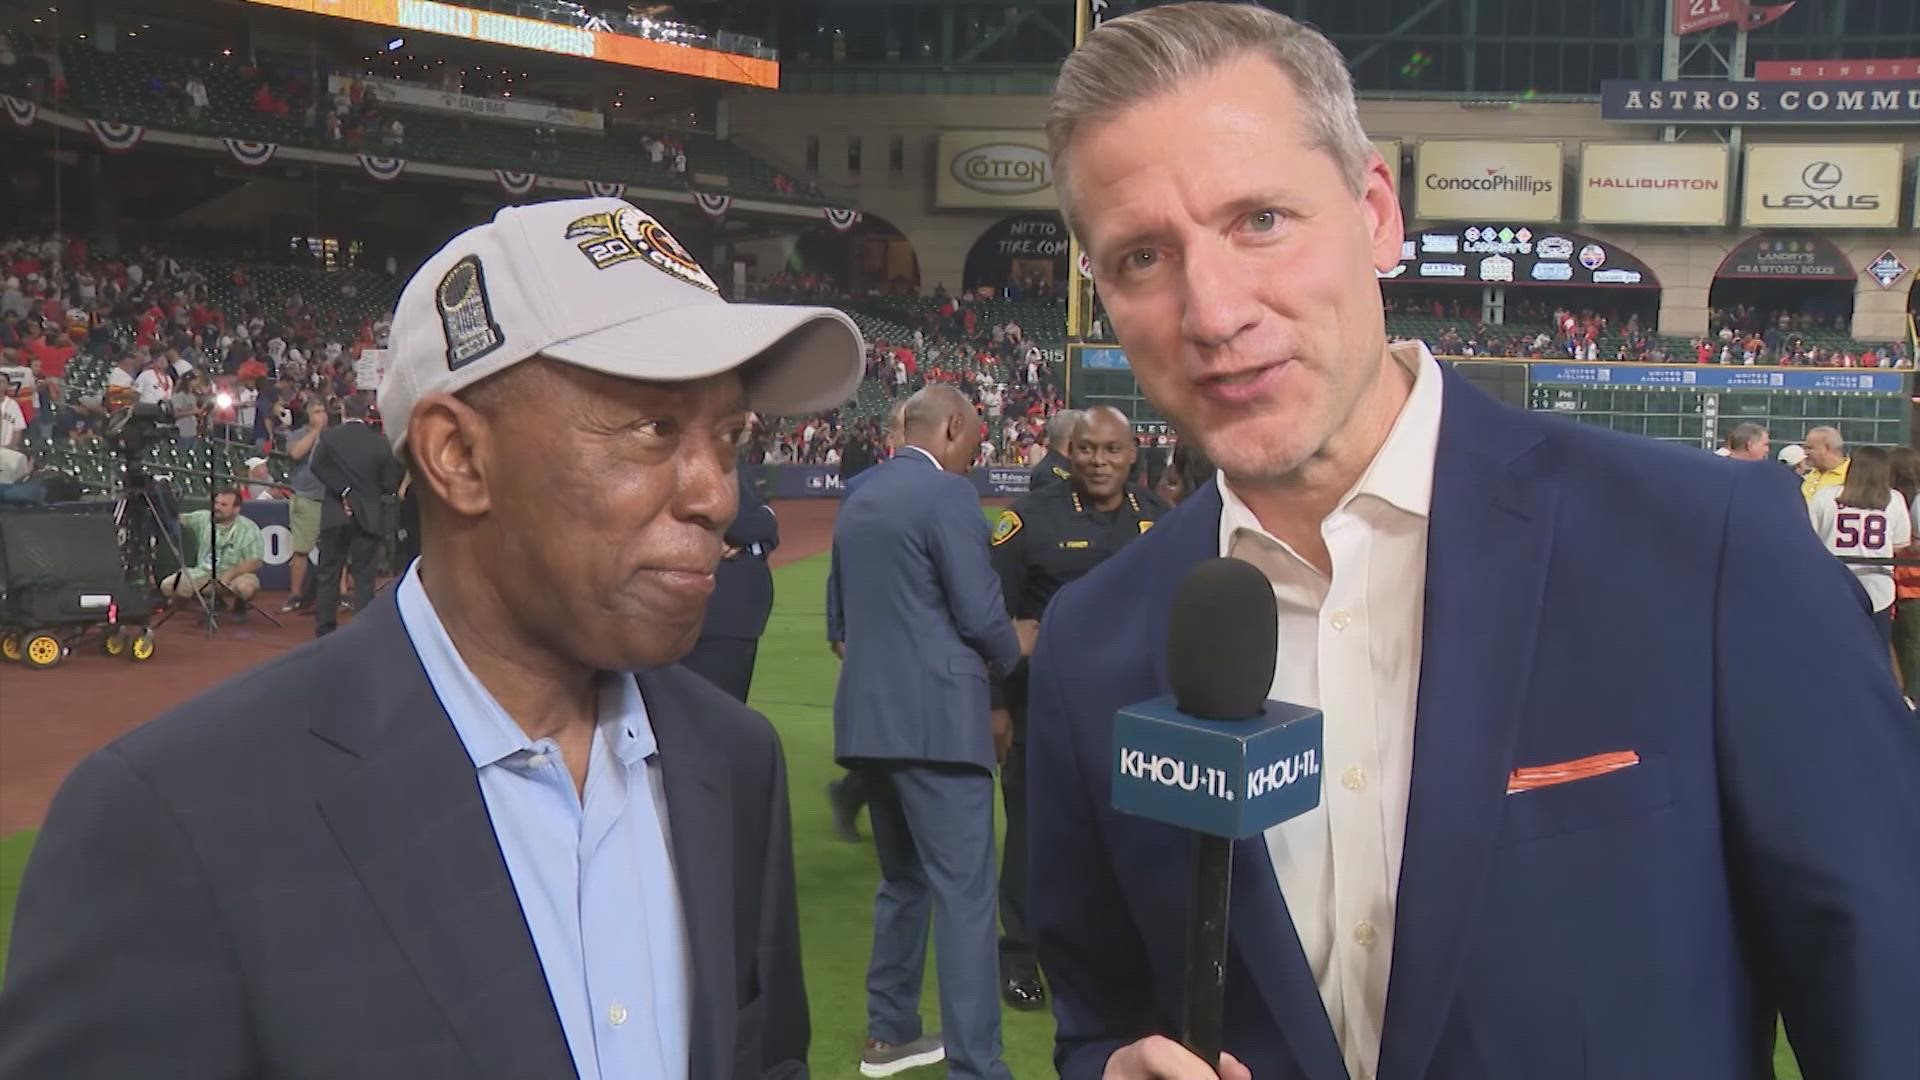 Mayor Turner shares details of World Series Championship parade to  celebrate Astros